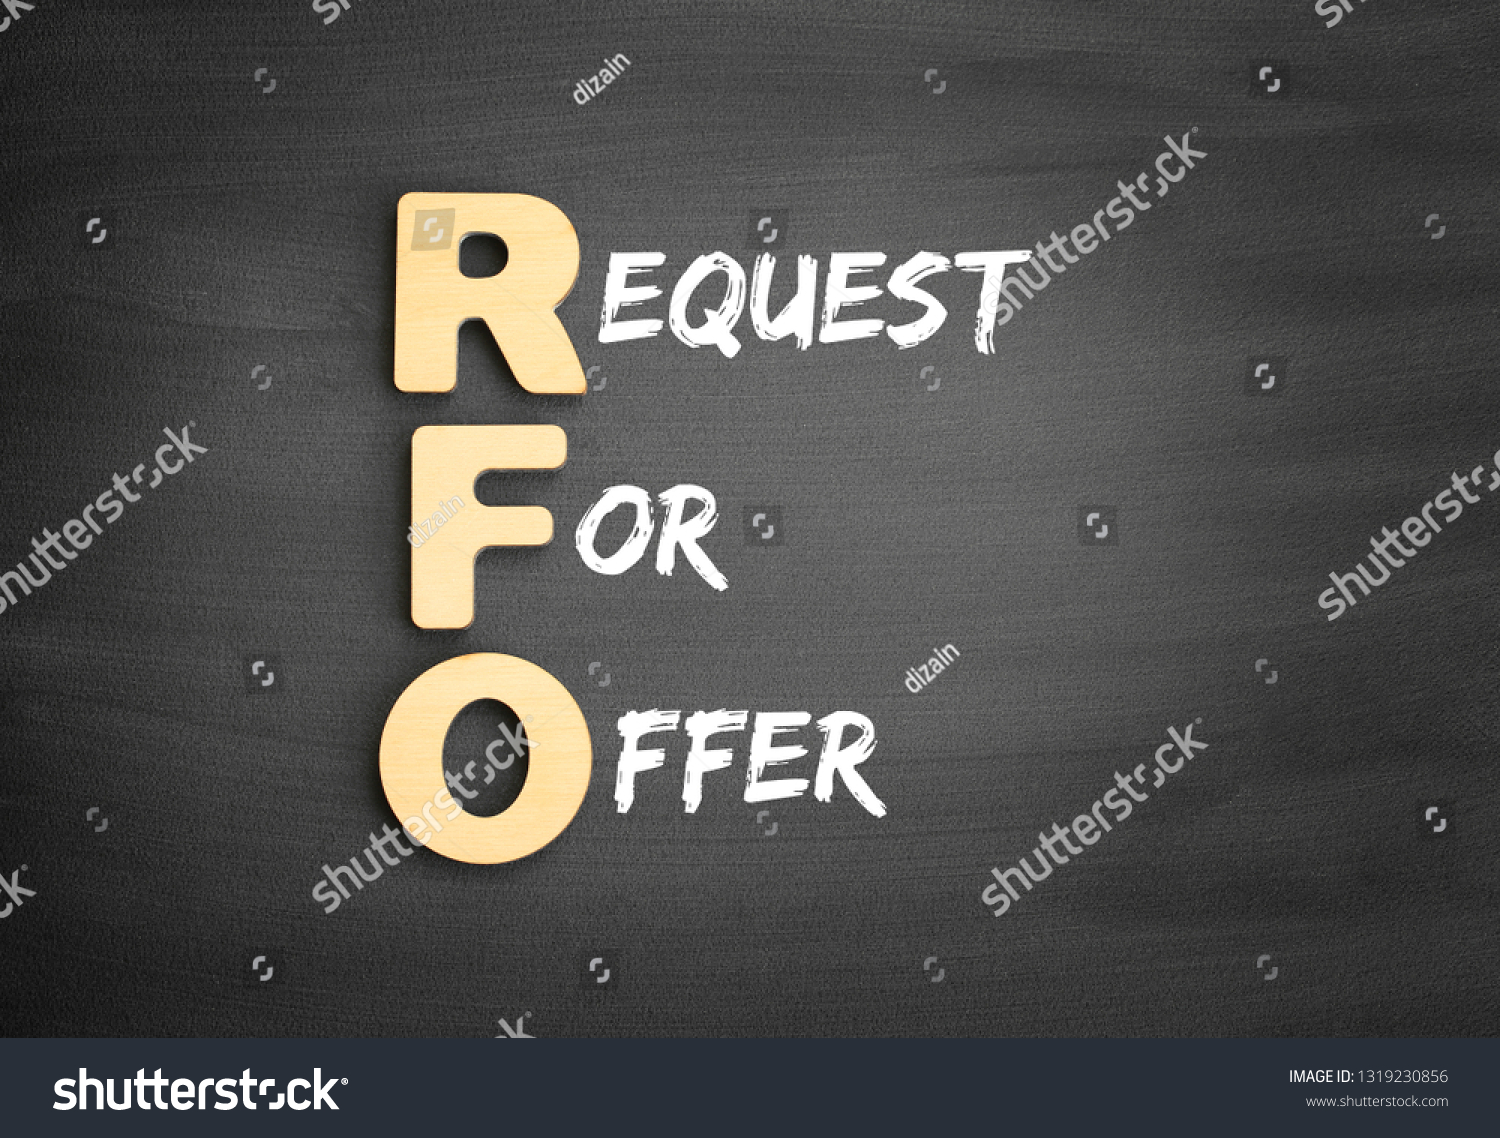 Wooden alphabets building the word RFO - Request For Offer acronym on blackboard #1319230856